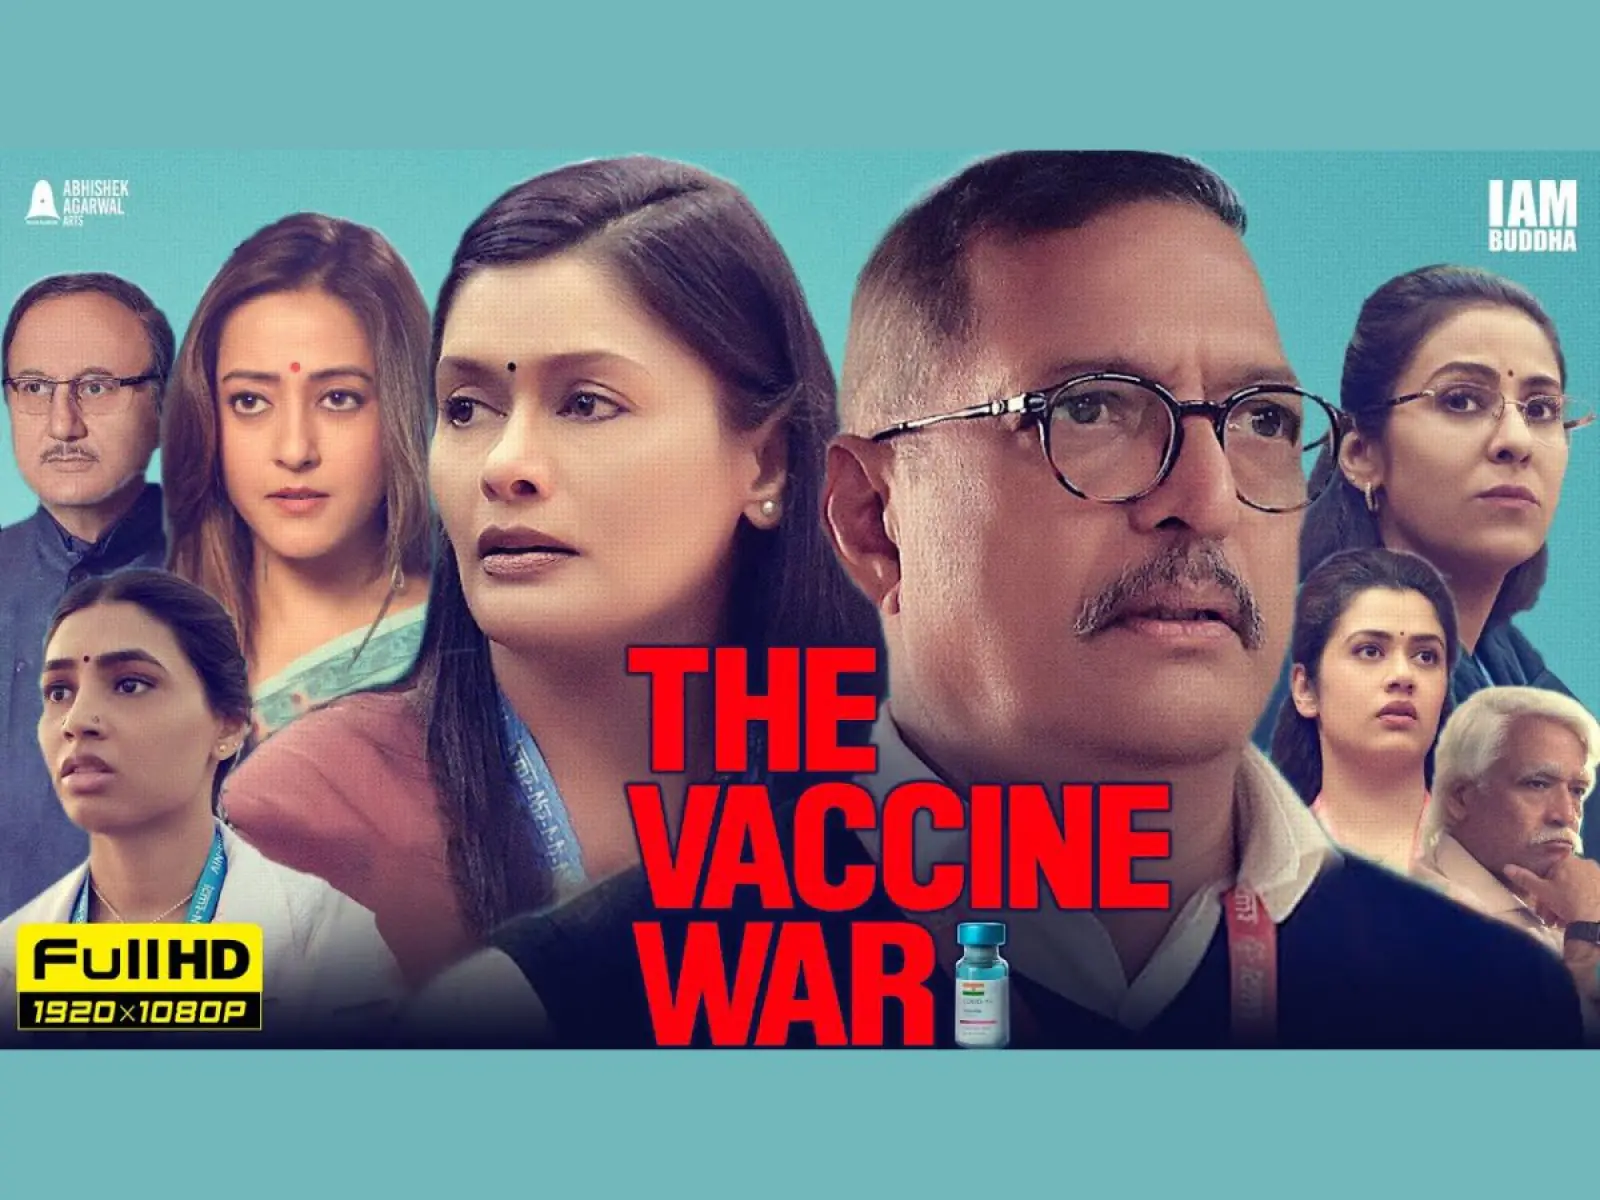 This Republic Day, Star Gold presents the world television premiere of The Vaccine War – Witness When India Won!